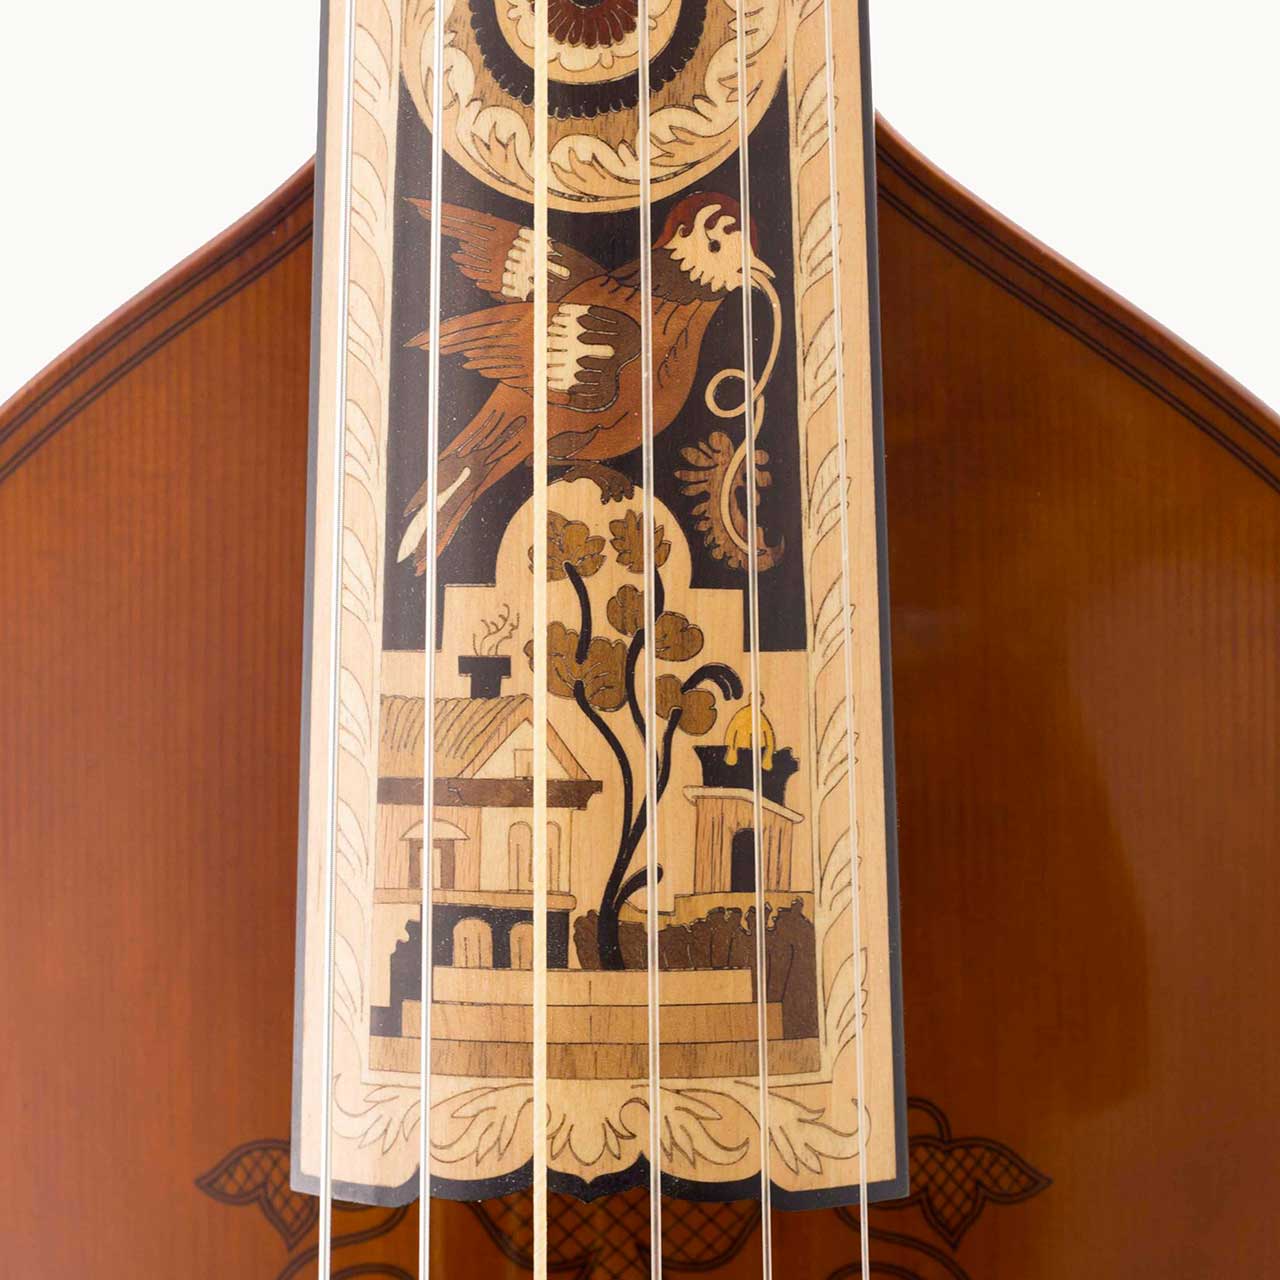 Viola da Gamba: History, Characteristics and Influence - Luthiers.com - Photos of Merion David Attwood's work